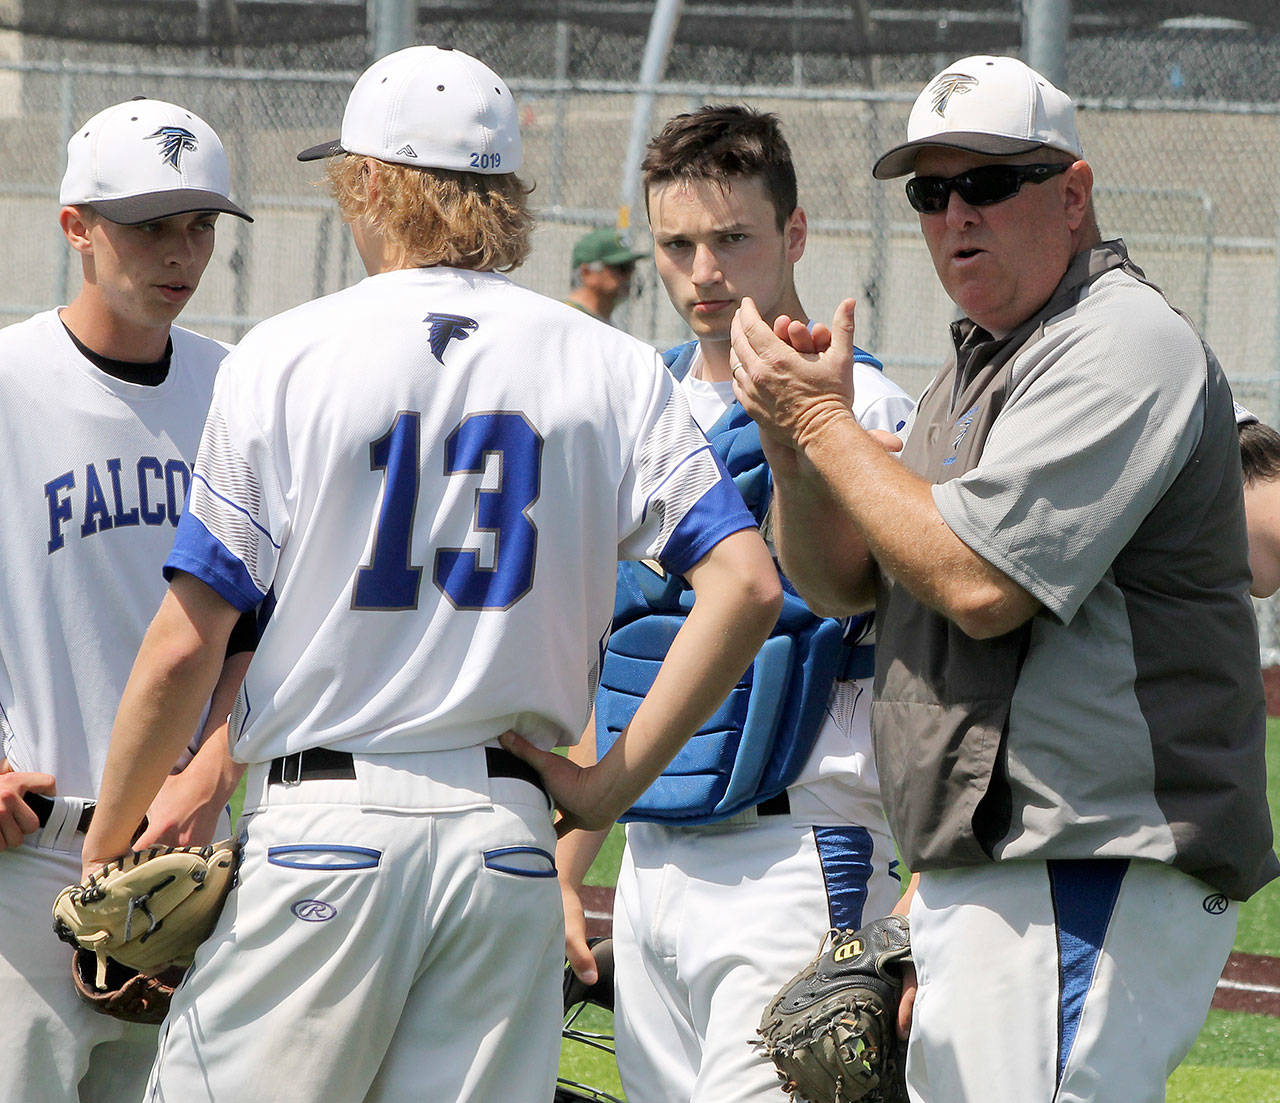 South Whidbey baseball coach Tom Fallon, right, meets on the mound with pitcher Ethan Petty, left, third baseman Drew Fry (13) and catcher Dexter Jokinen. Fallon was named the conference’s Coach of the Year, Petty the Pitcher of the Year and Fry first-team, all-league. (Photo by Jim Waller/South Whidbey Record)